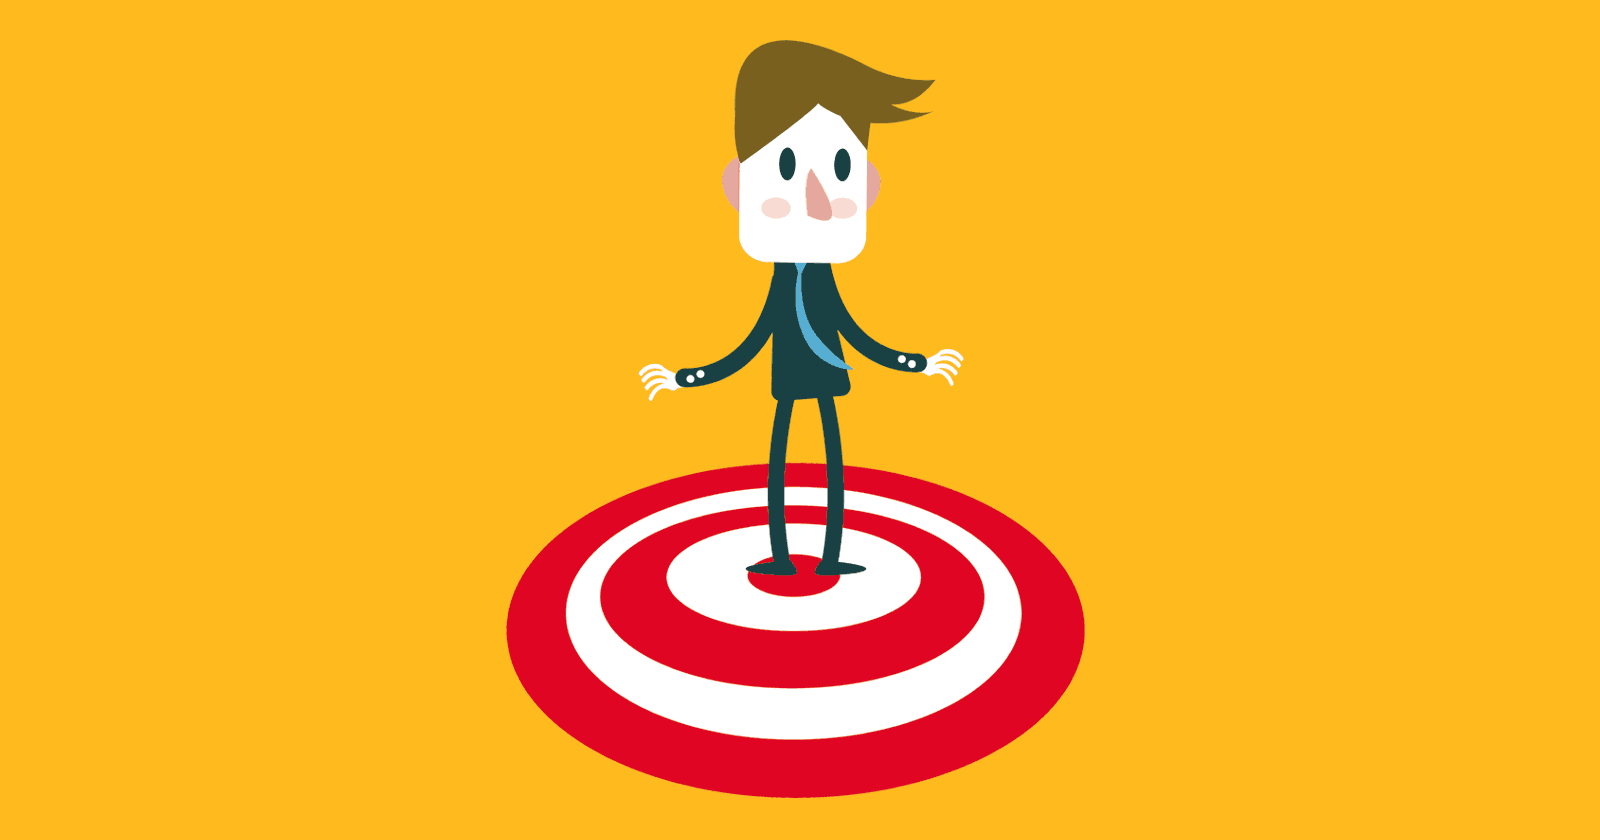 Image of a person standing on a bulls eye target